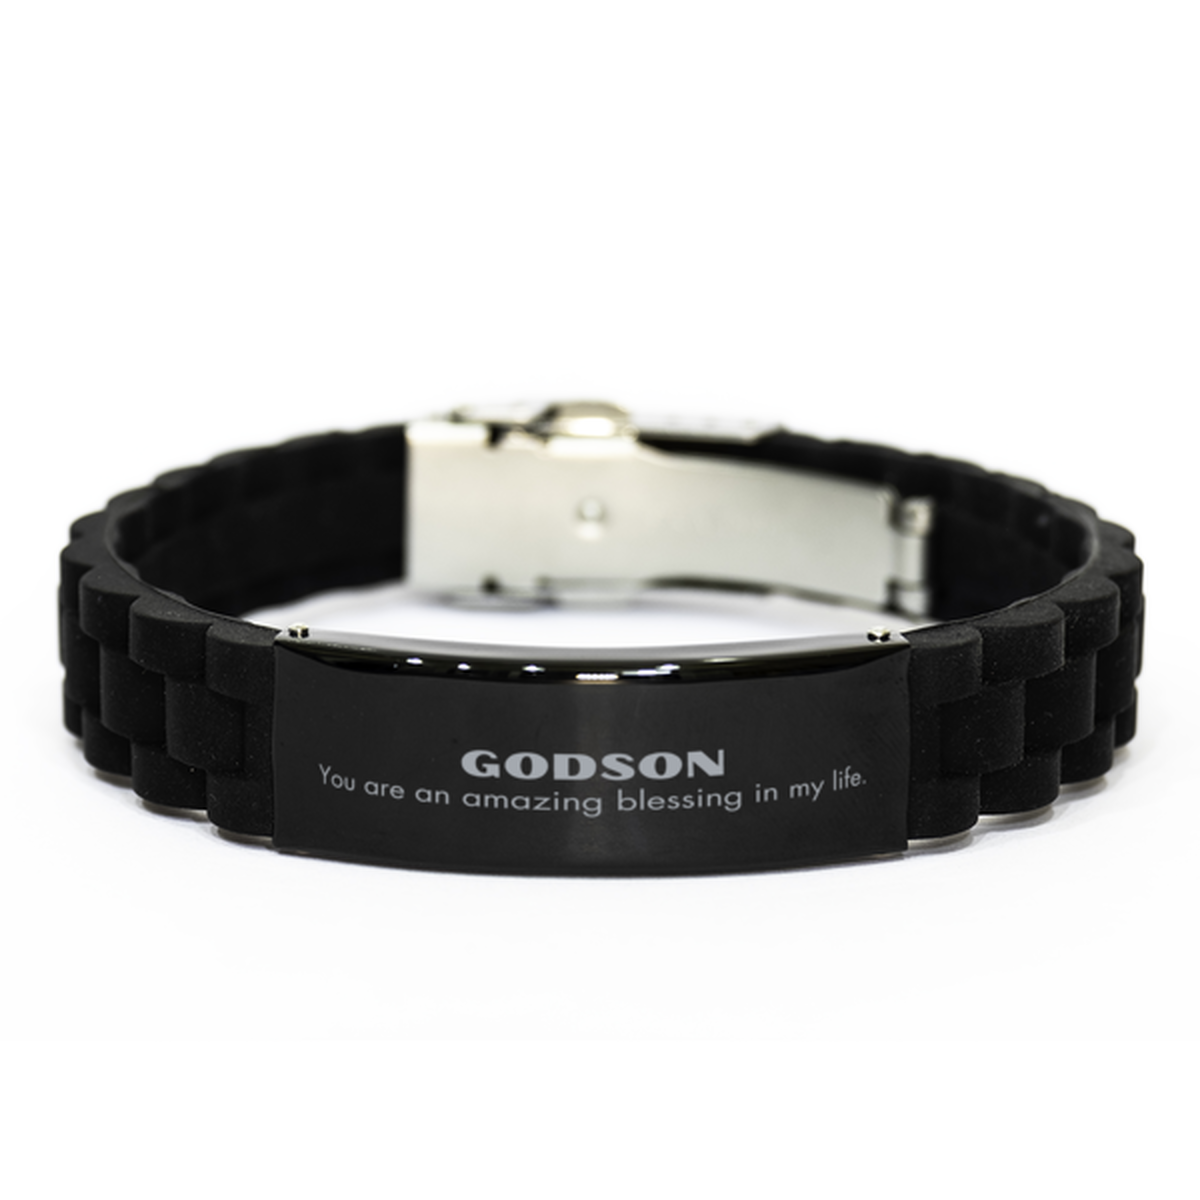 Godson Black Glidelock Clasp Bracelet, You are an amazing blessing in my life, Thank You Gifts For Godson, Inspirational Birthday Christmas Unique Gifts For Godson